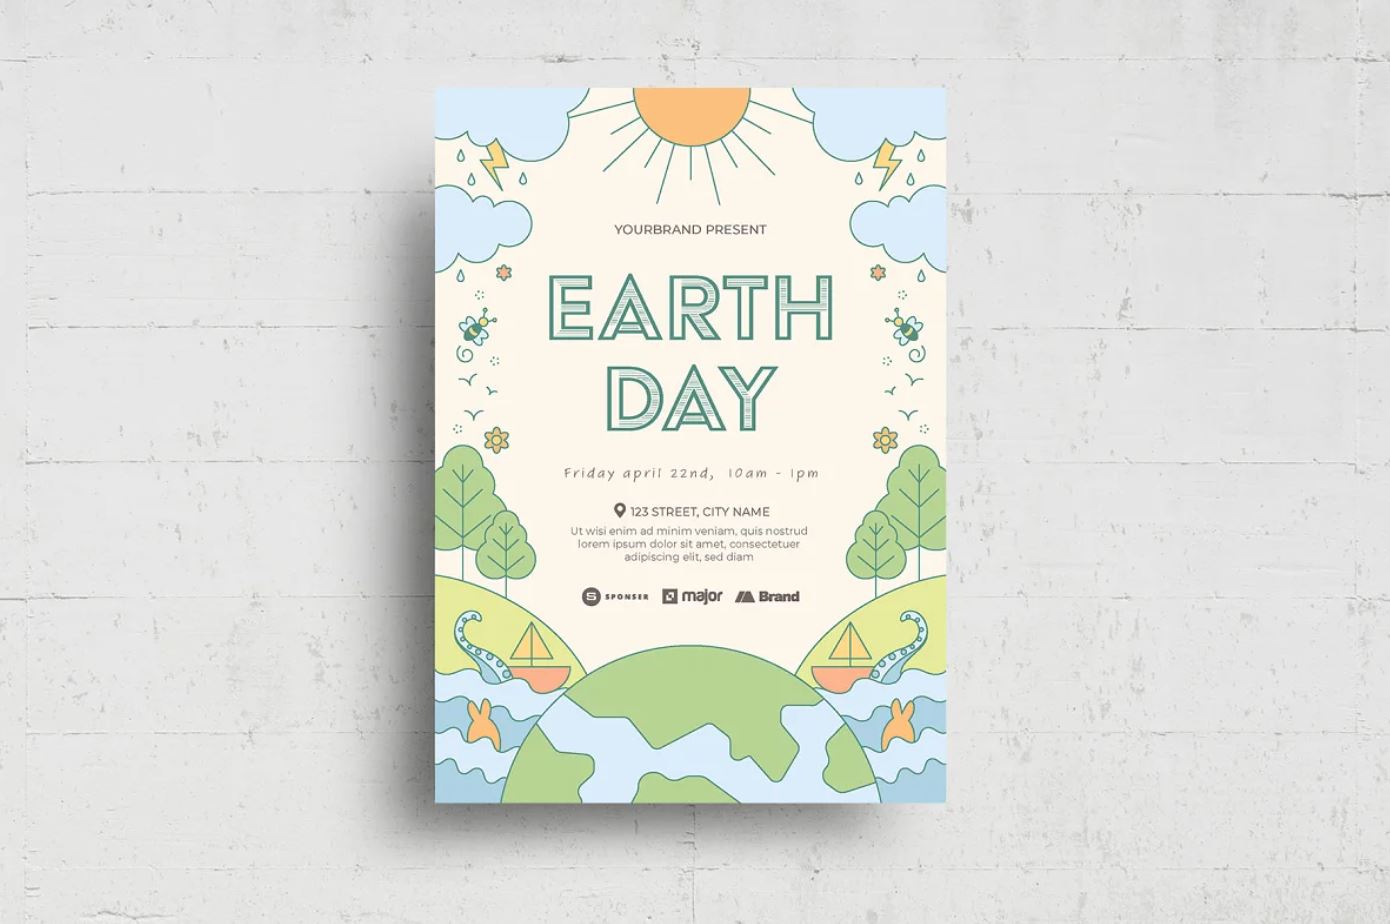 Earth Day Promotional Event Flyer Template Download